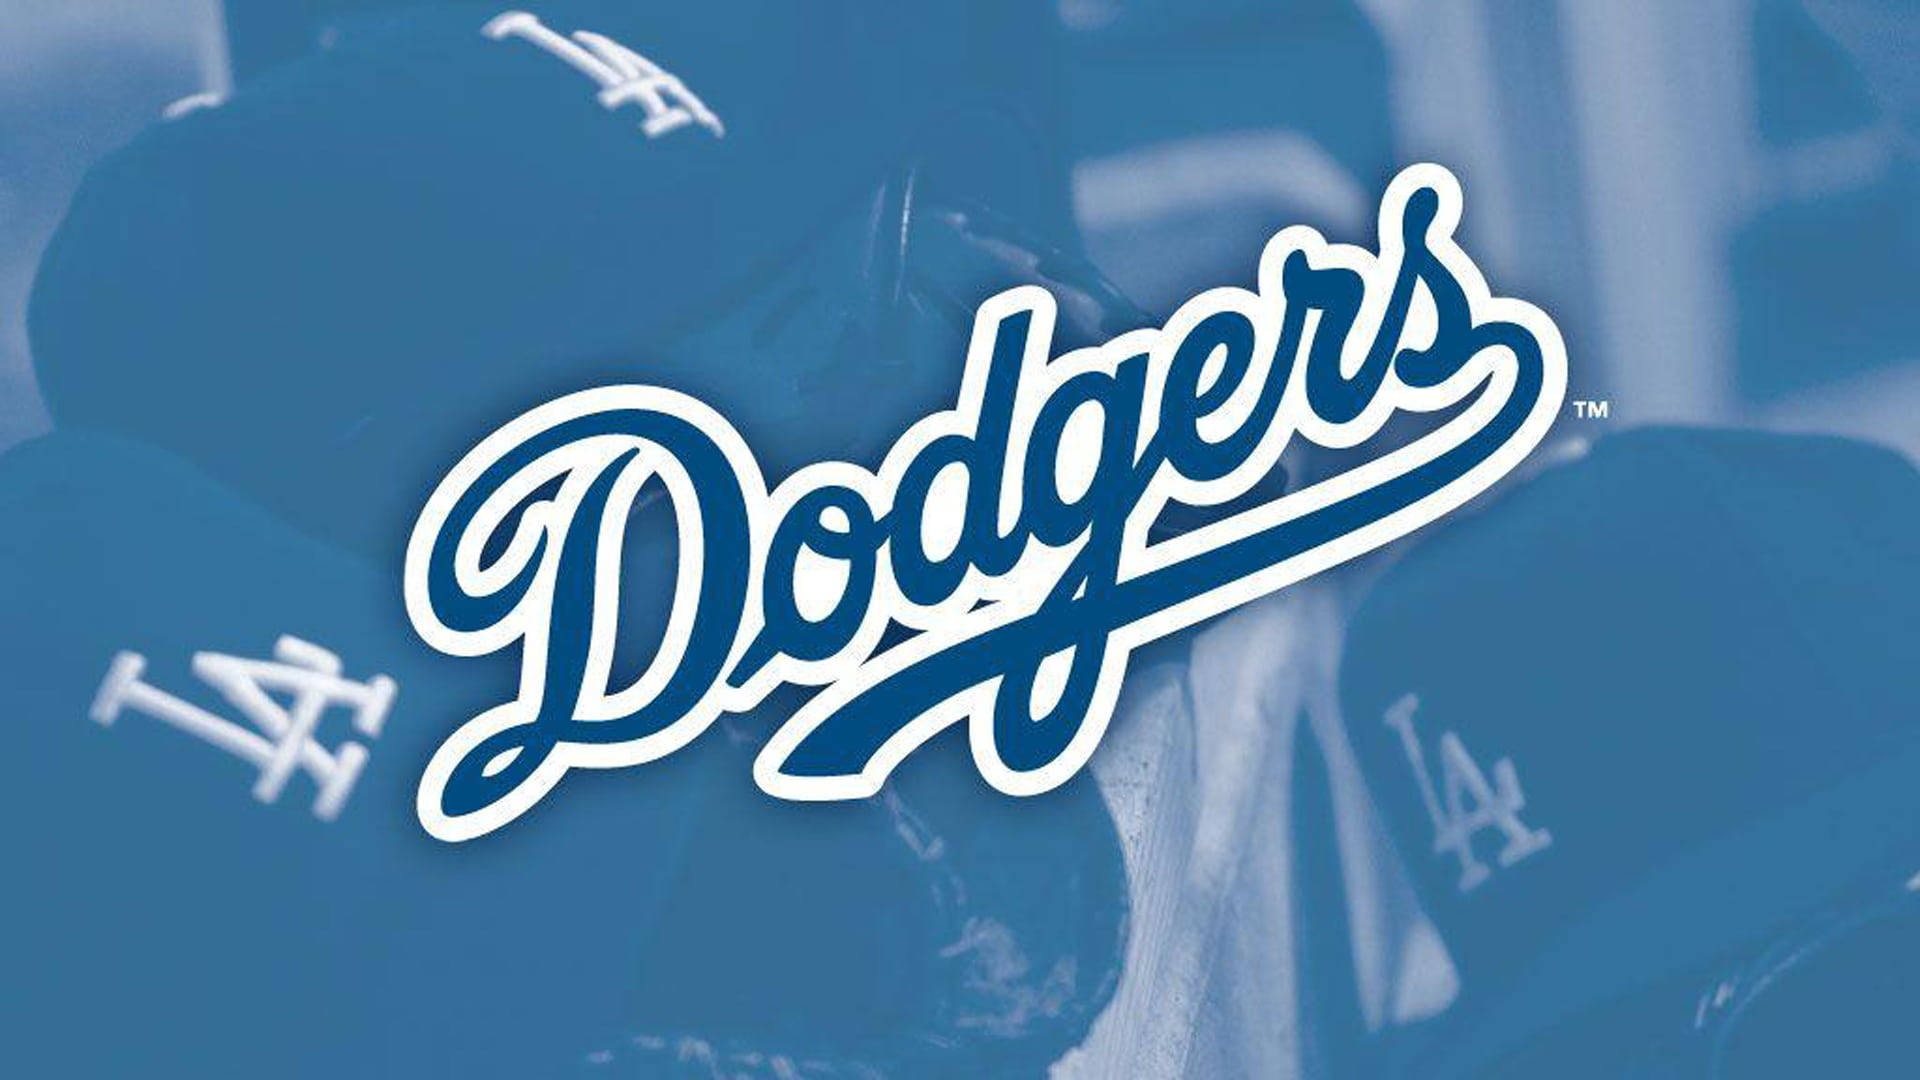 los angeles dodgers wallpapers｜TikTok Search